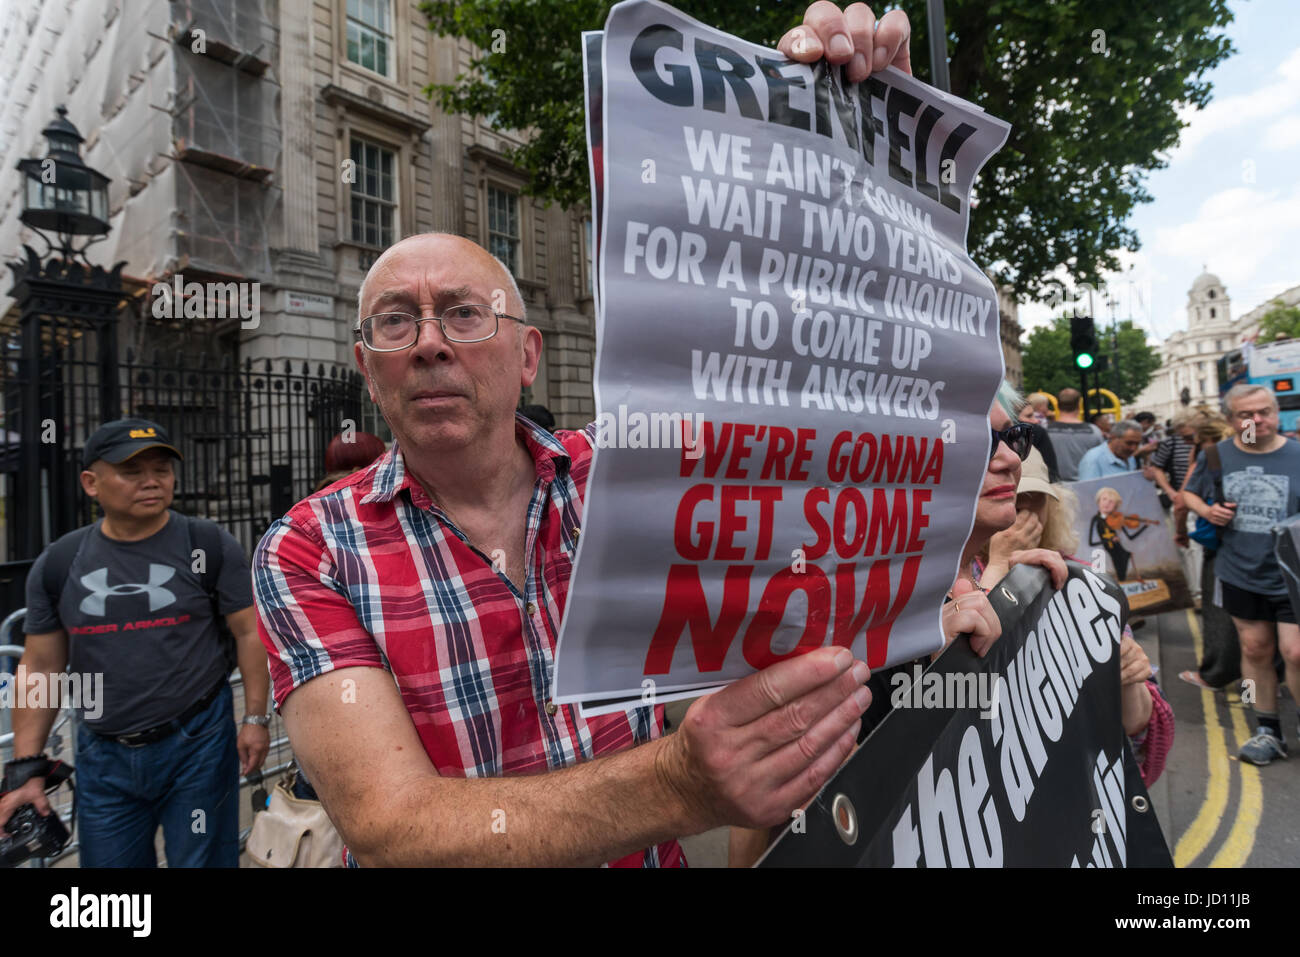 London, UK. 17th June, 2017. London, UK. 17th June, 2017. Ian BOne of Class War stands behind their banner outside Downing St facing the large protest across thr road calling on Theresa May to resign.He holds up a poster 'Grenfell - We ain't gonna wait two years for a public inquiry to come up with answers - We'e gonna get some NOW'. Peter Marshall Images Live Credit: Peter Marshall/ImagesLive/ZUMA Wire/Alamy Live News Stock Photo